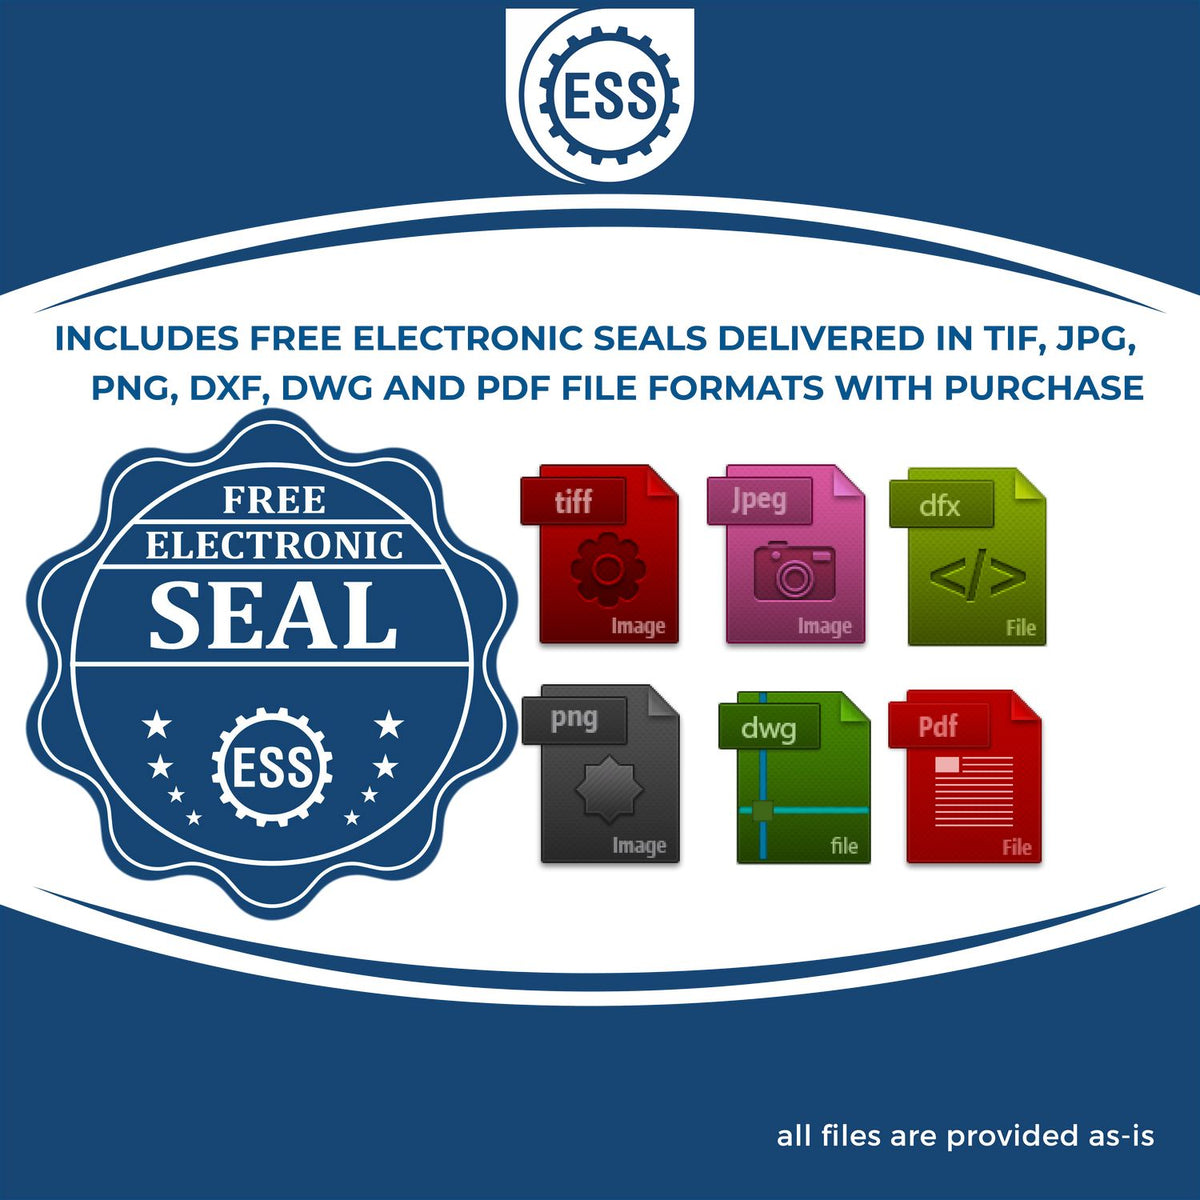 An infographic for the free electronic seal for the Slim Pre-Inked Texas Land Surveyor Seal Stamp illustrating the different file type icons such as DXF, DWG, TIF, JPG and PNG.